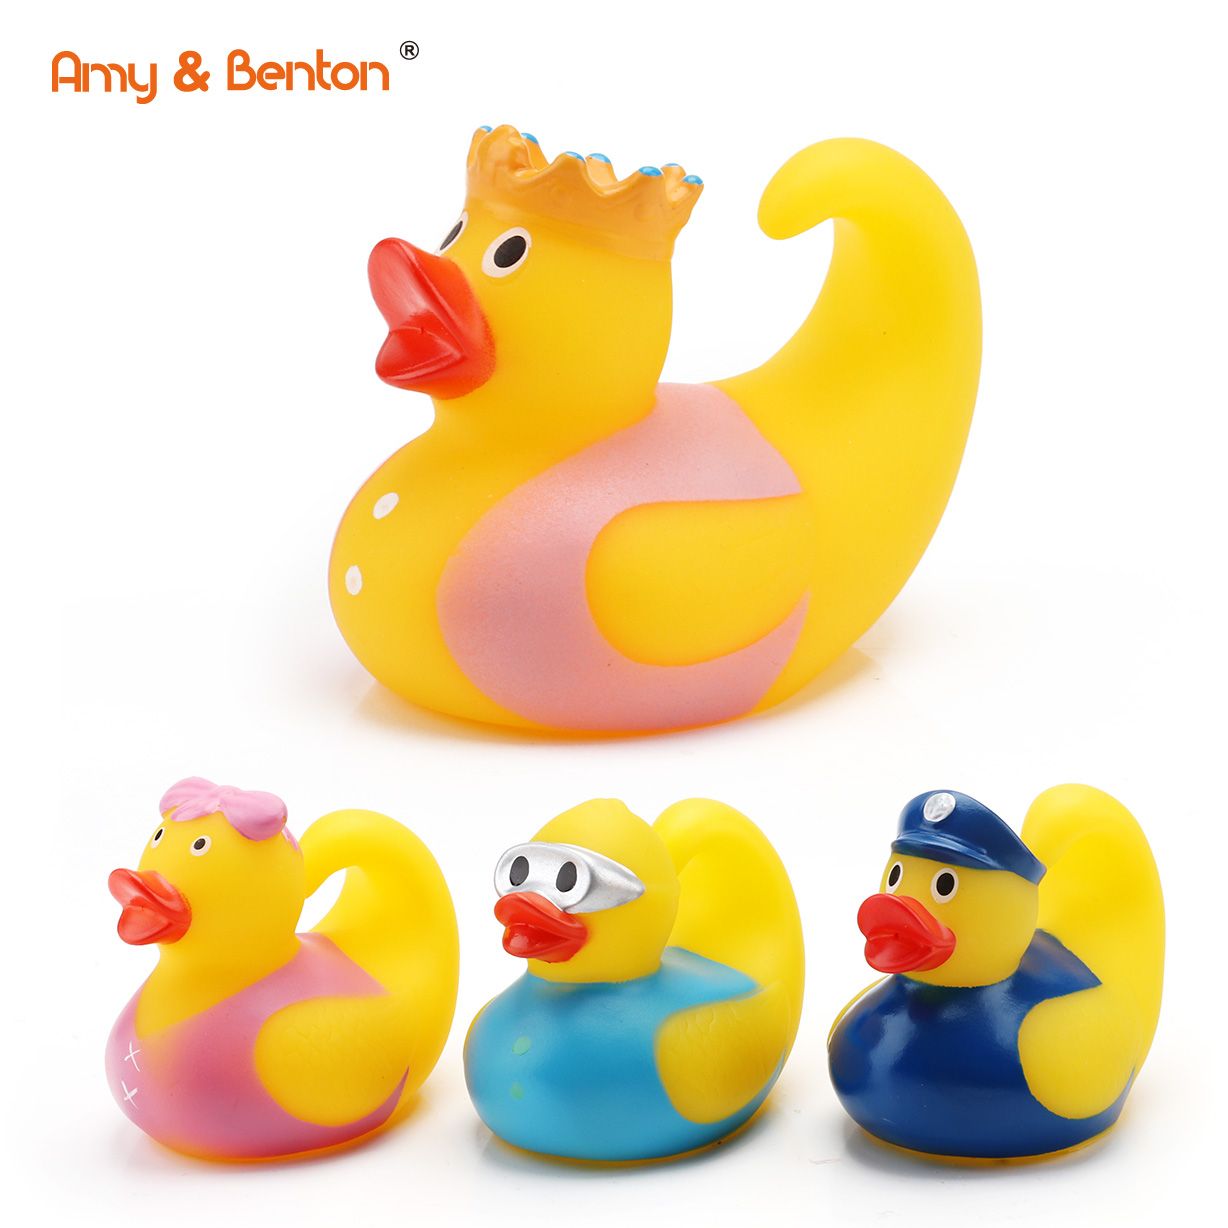 Rubber Bath Ducky Toys Birthday Projects Gifts Baby Showers Classroom Summer Beach and Pool Activity Party Favors